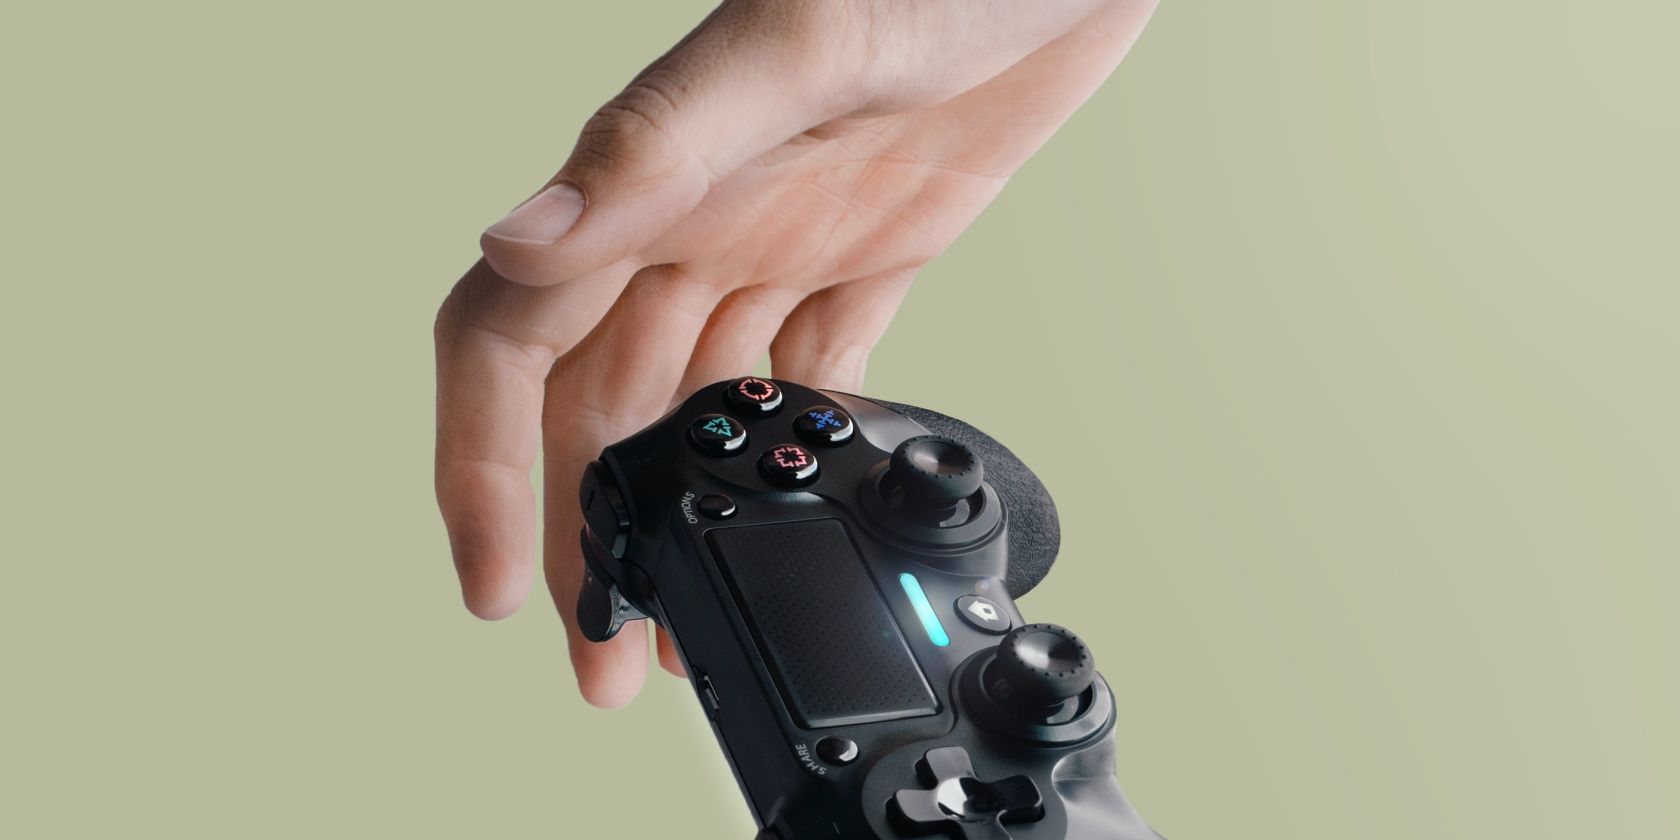 third party controller for ps4